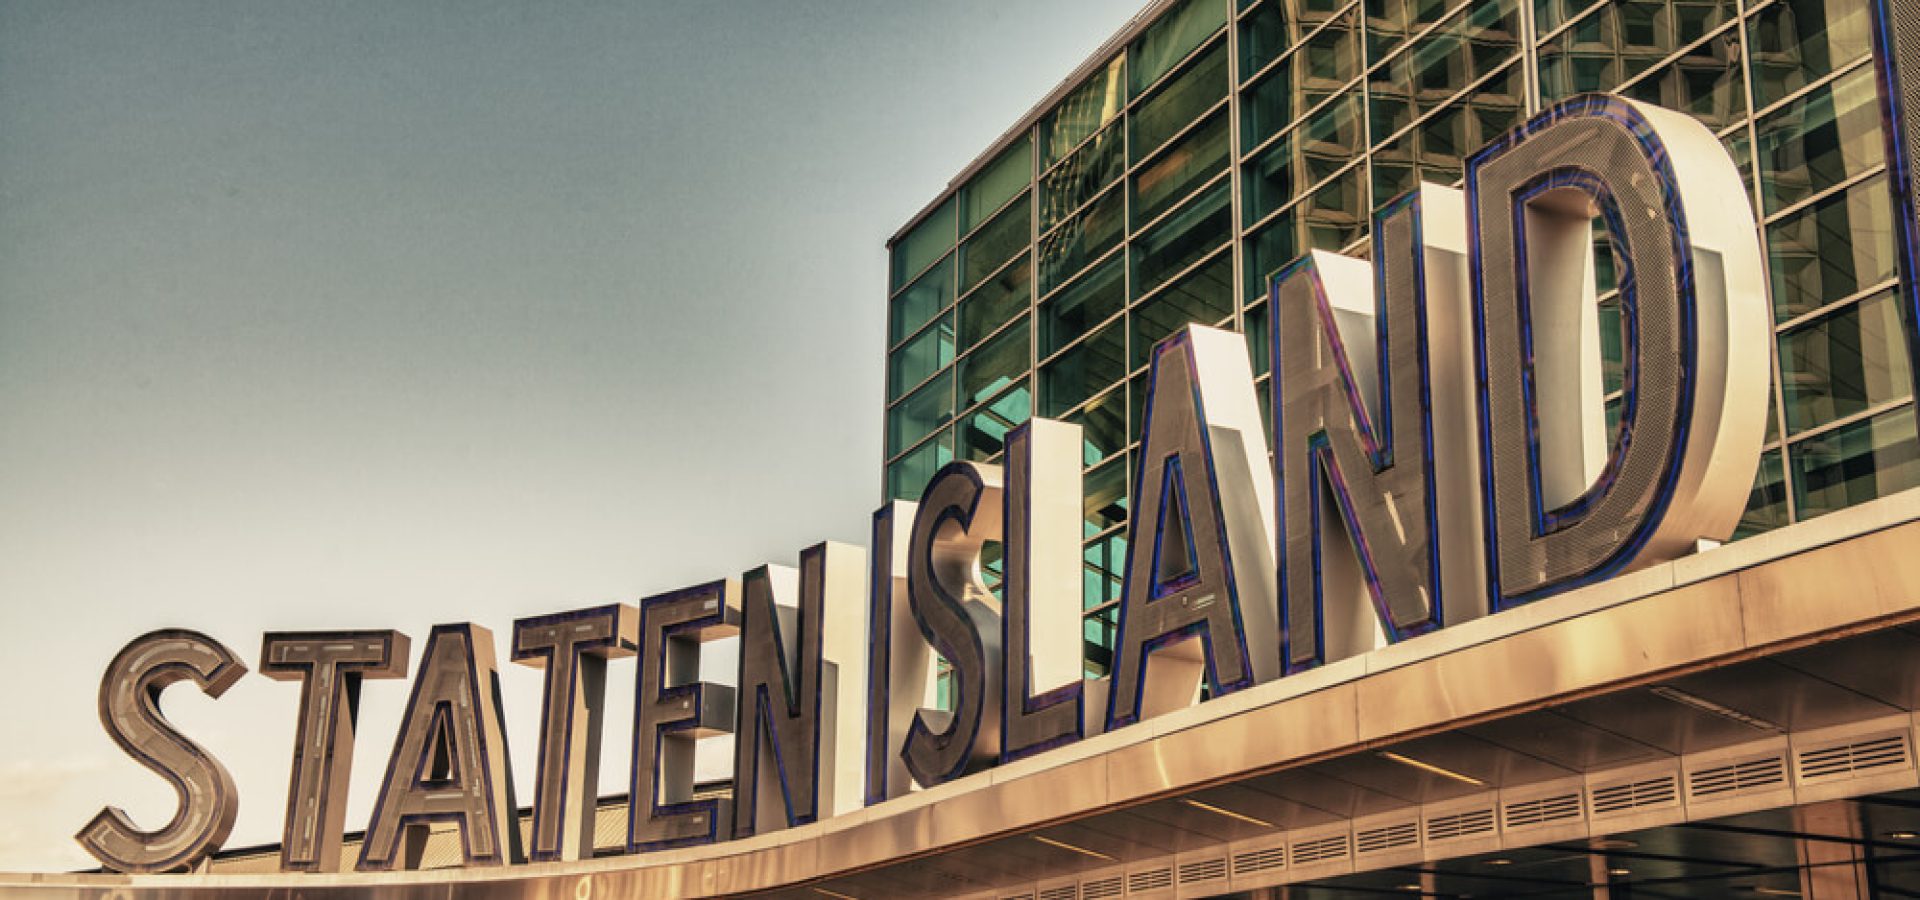 Famous Staten Island Ferry entrance sign